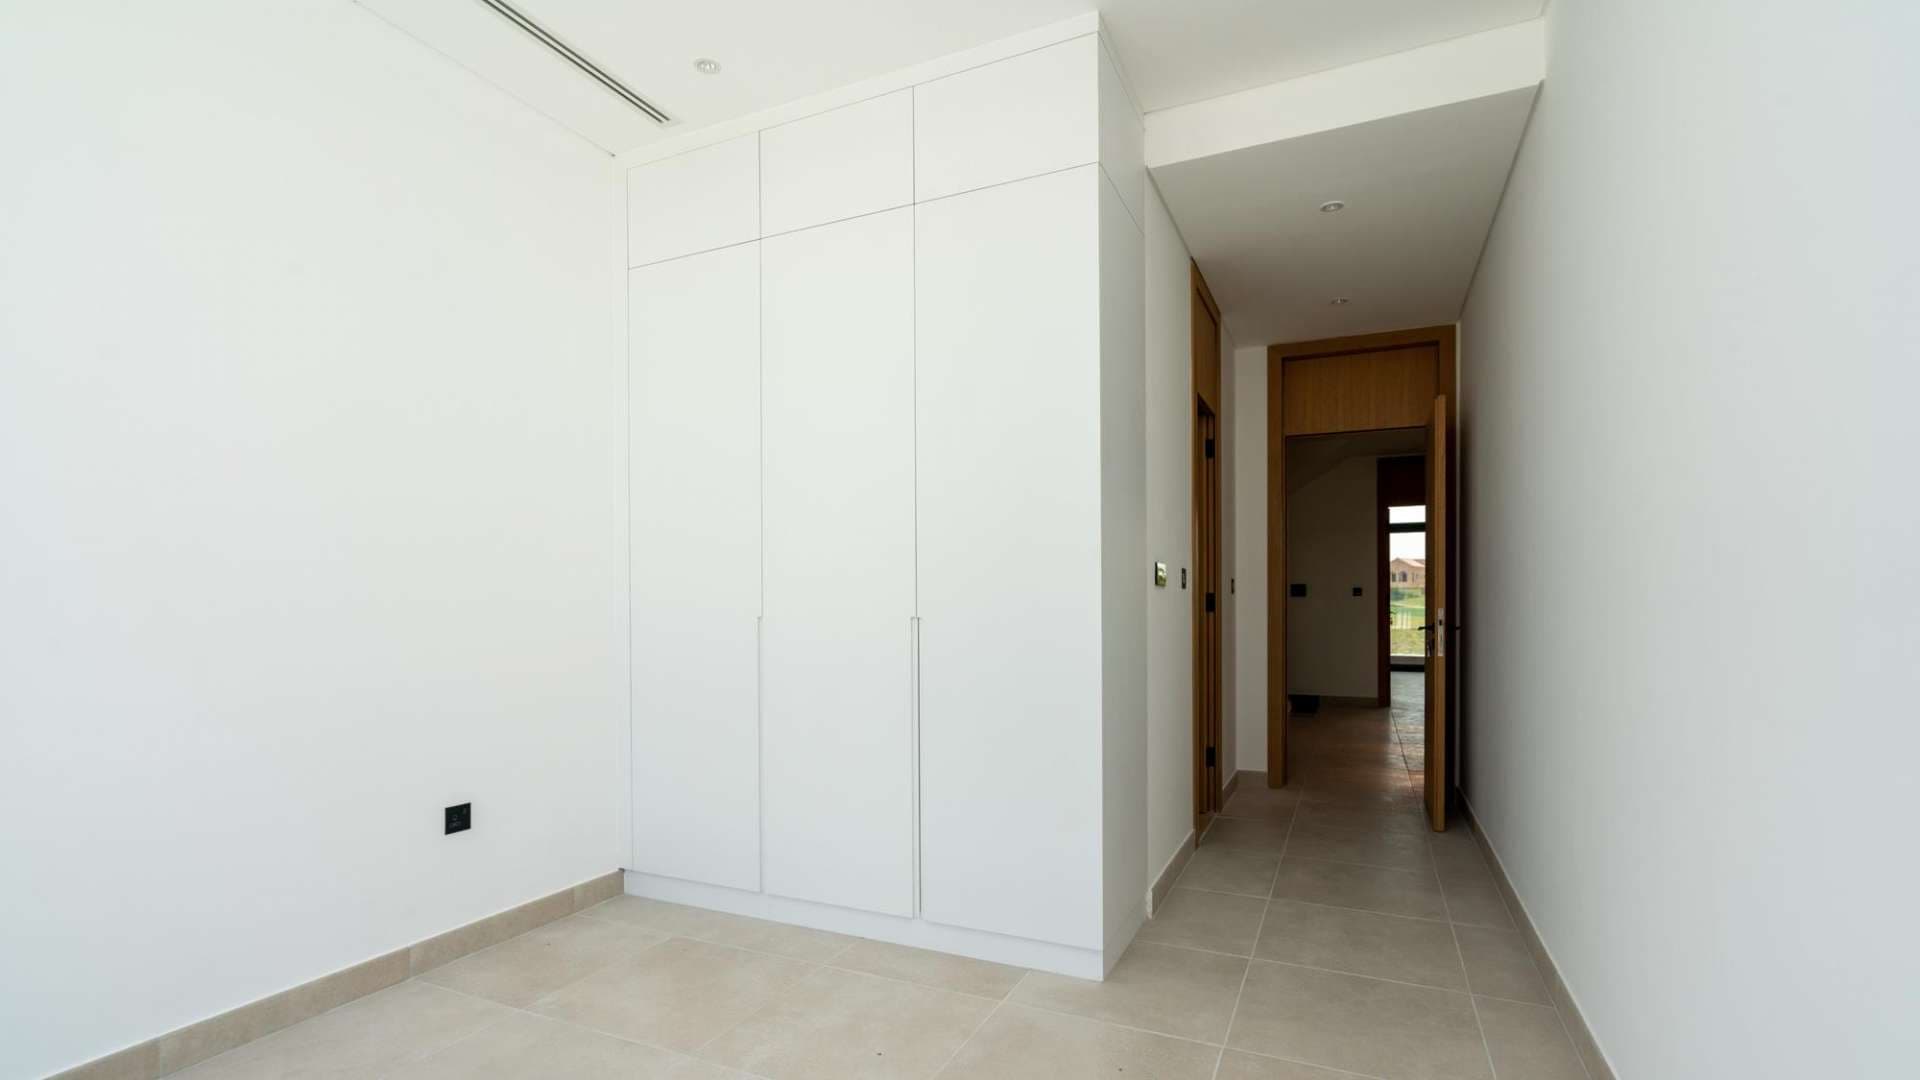 3 Bedroom Townhouse For Sale Jumeirah Luxury Living Lp03856 650f3f9ae4aff00.jpg